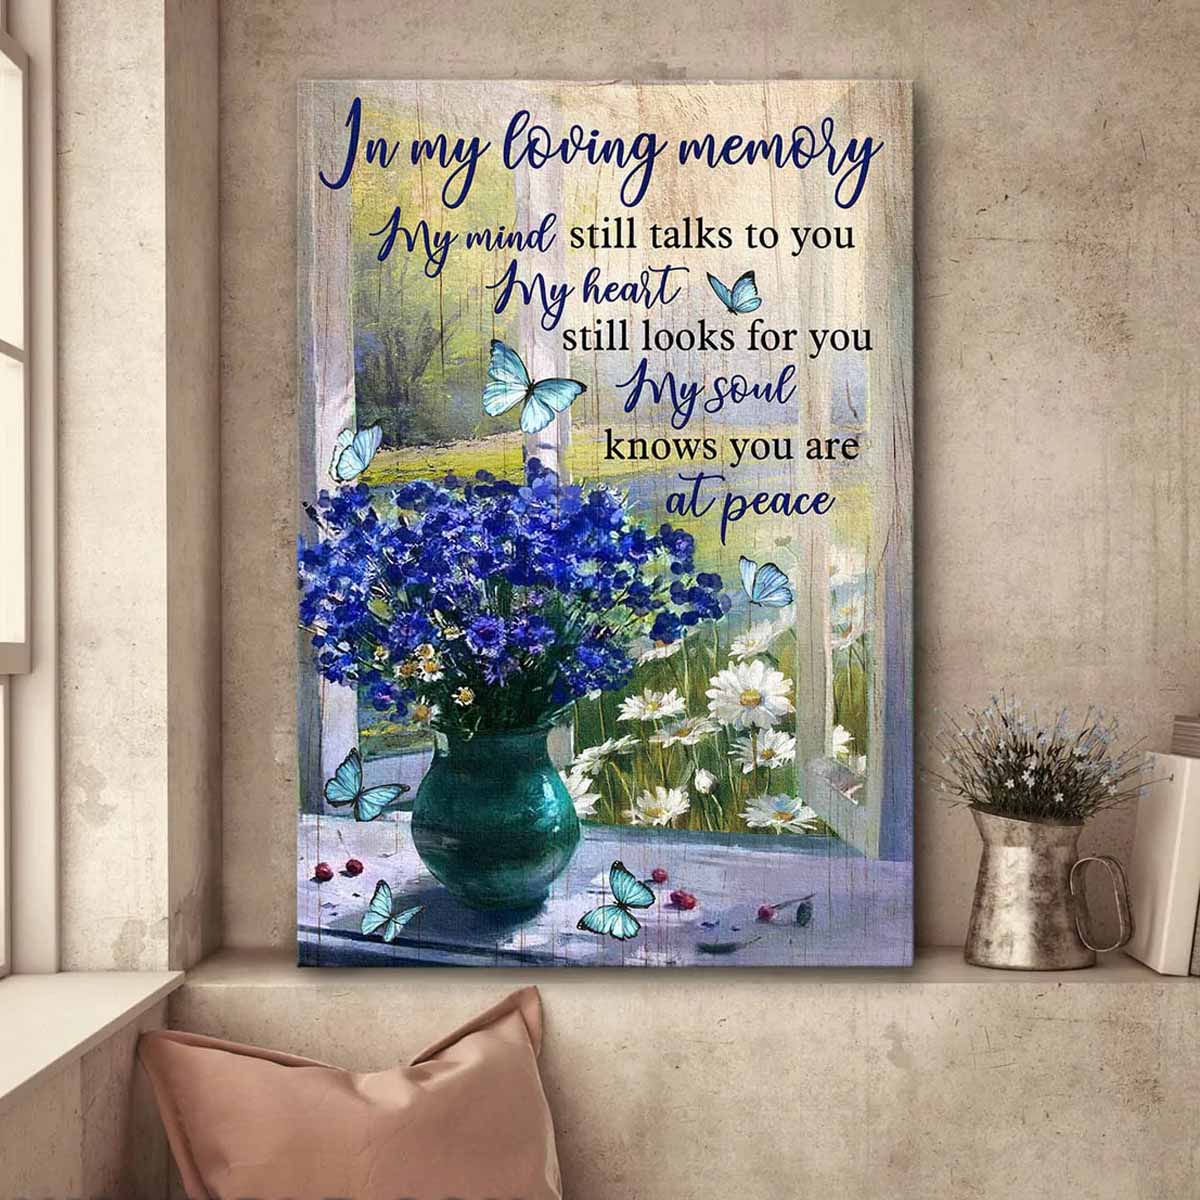 Heaven Portrait Canvas - Blue flower vase by the window Portrait Canvas - Memorial Gift For Family Members - My heart still looks for you My soul knows you are at peace Portrait Canvas